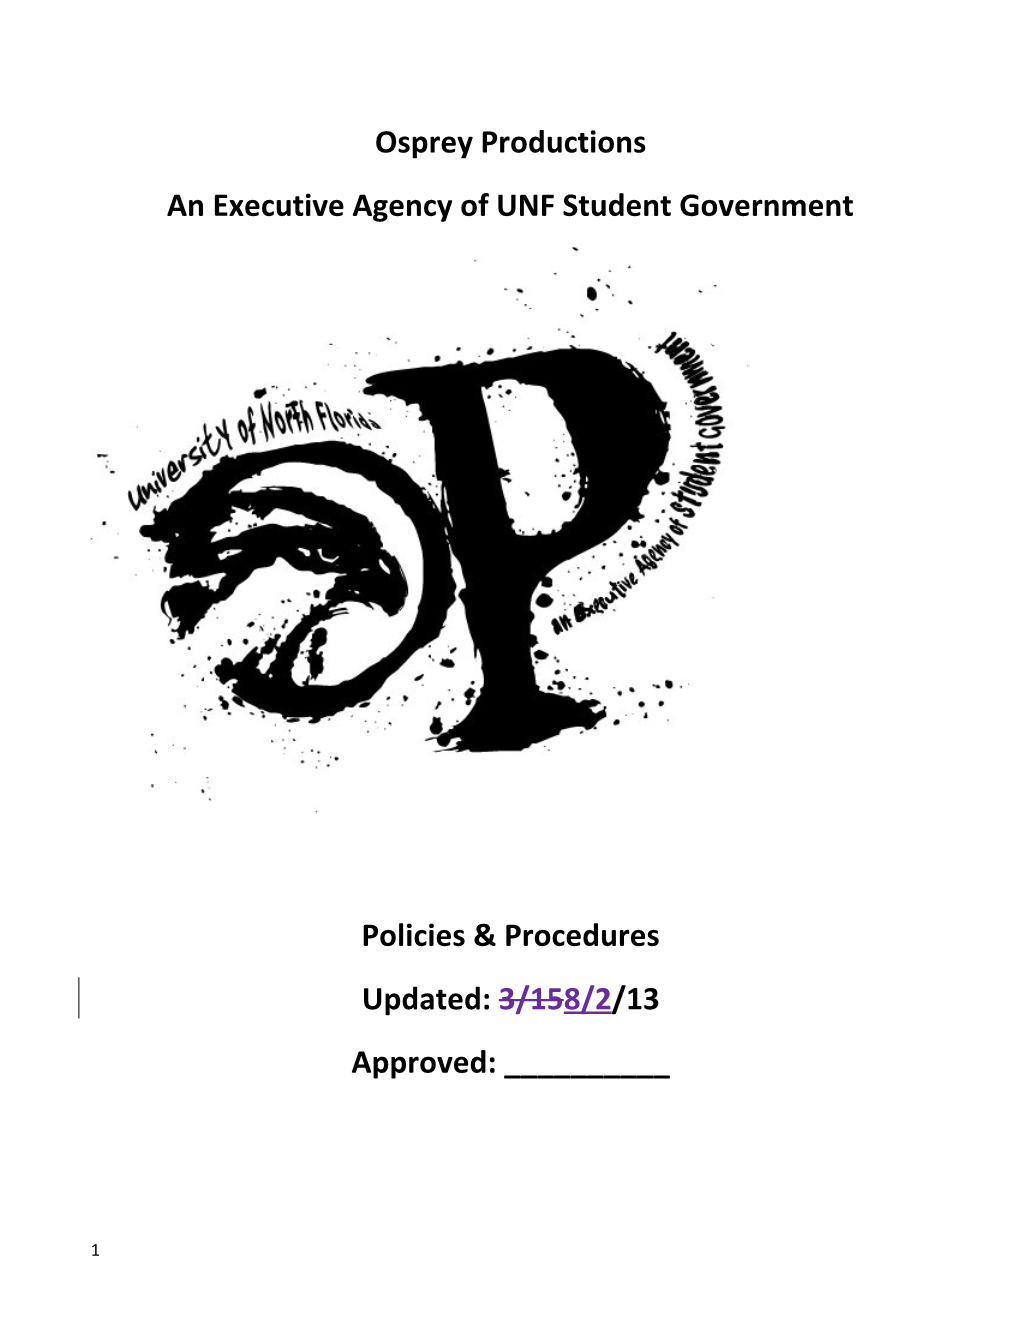 An Executive Agency of UNF Student Government